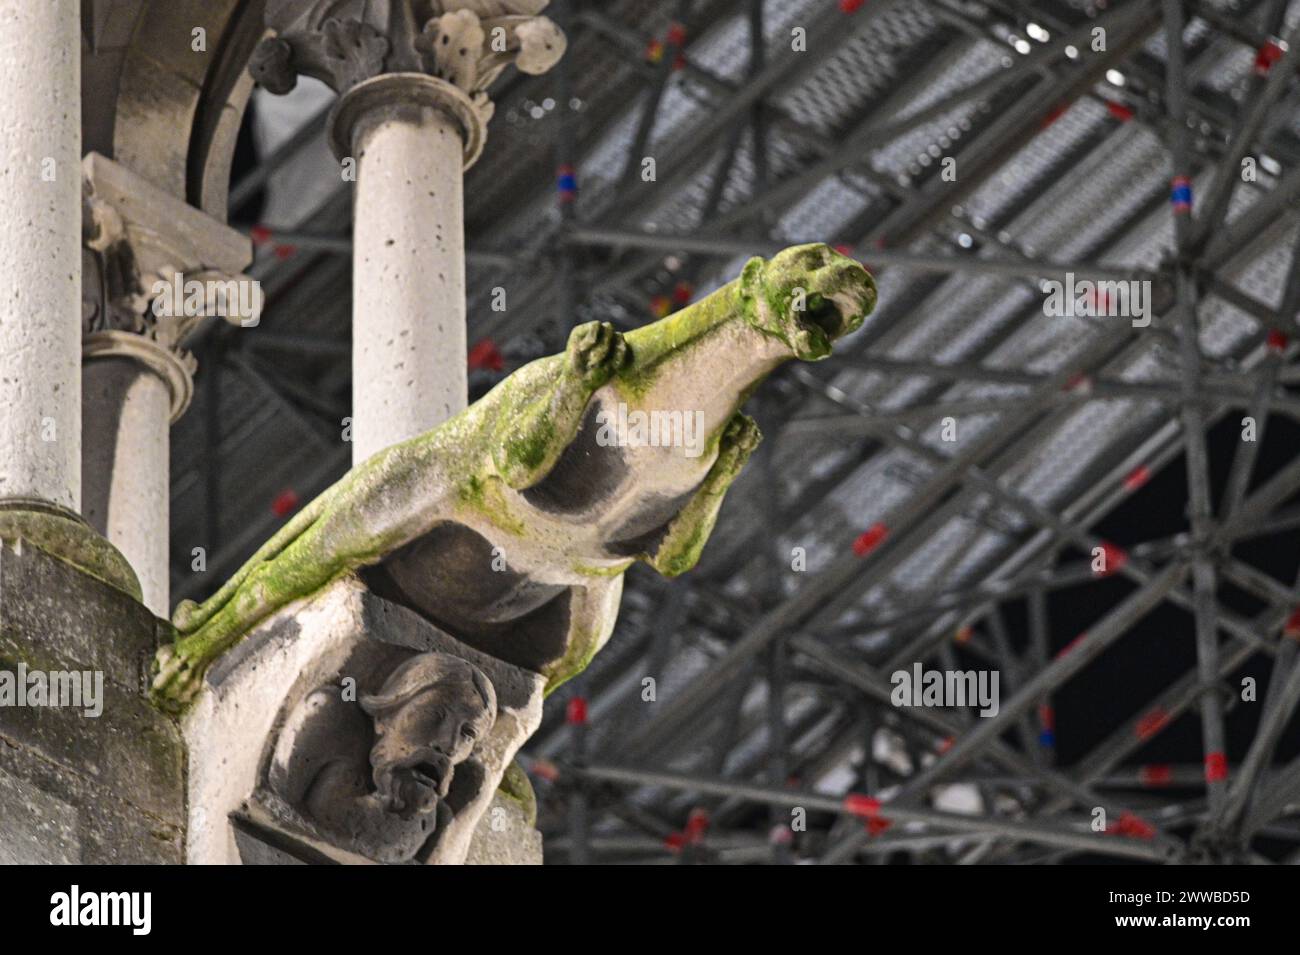 Scaffolding for the restoration of Notre-Dame de Paris Cathedral in France after the fire of April 15, 2019. Stock Photo